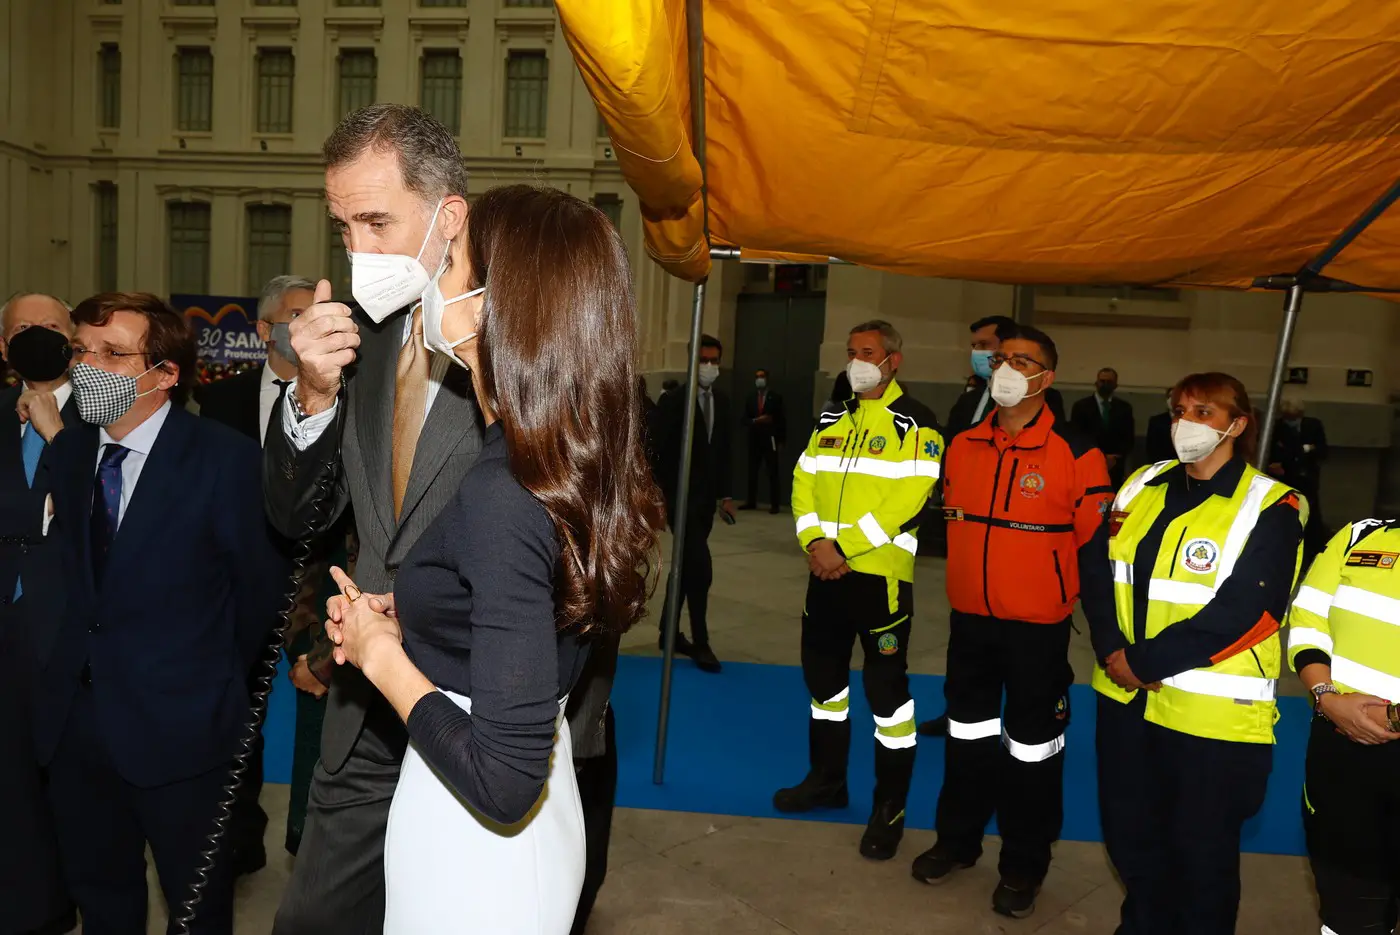 King Felipe and Queen Letizia attended SAMUR-Civil Protection Anniversary